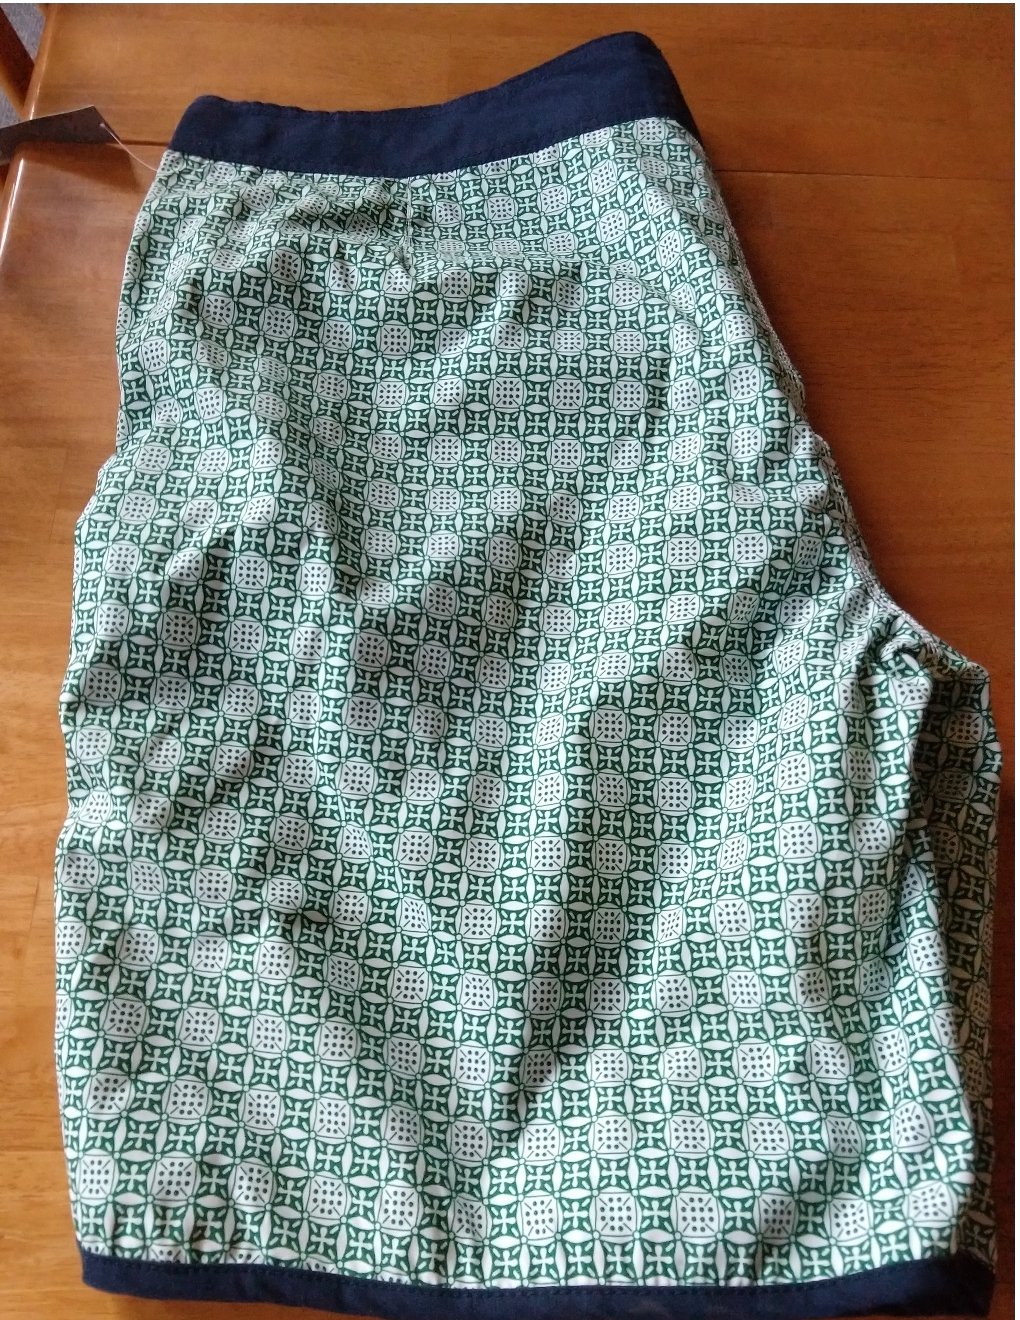 Mens 2XL OR XXL Navy, Green & White Swim Trunks or Suit by Old Navy ...